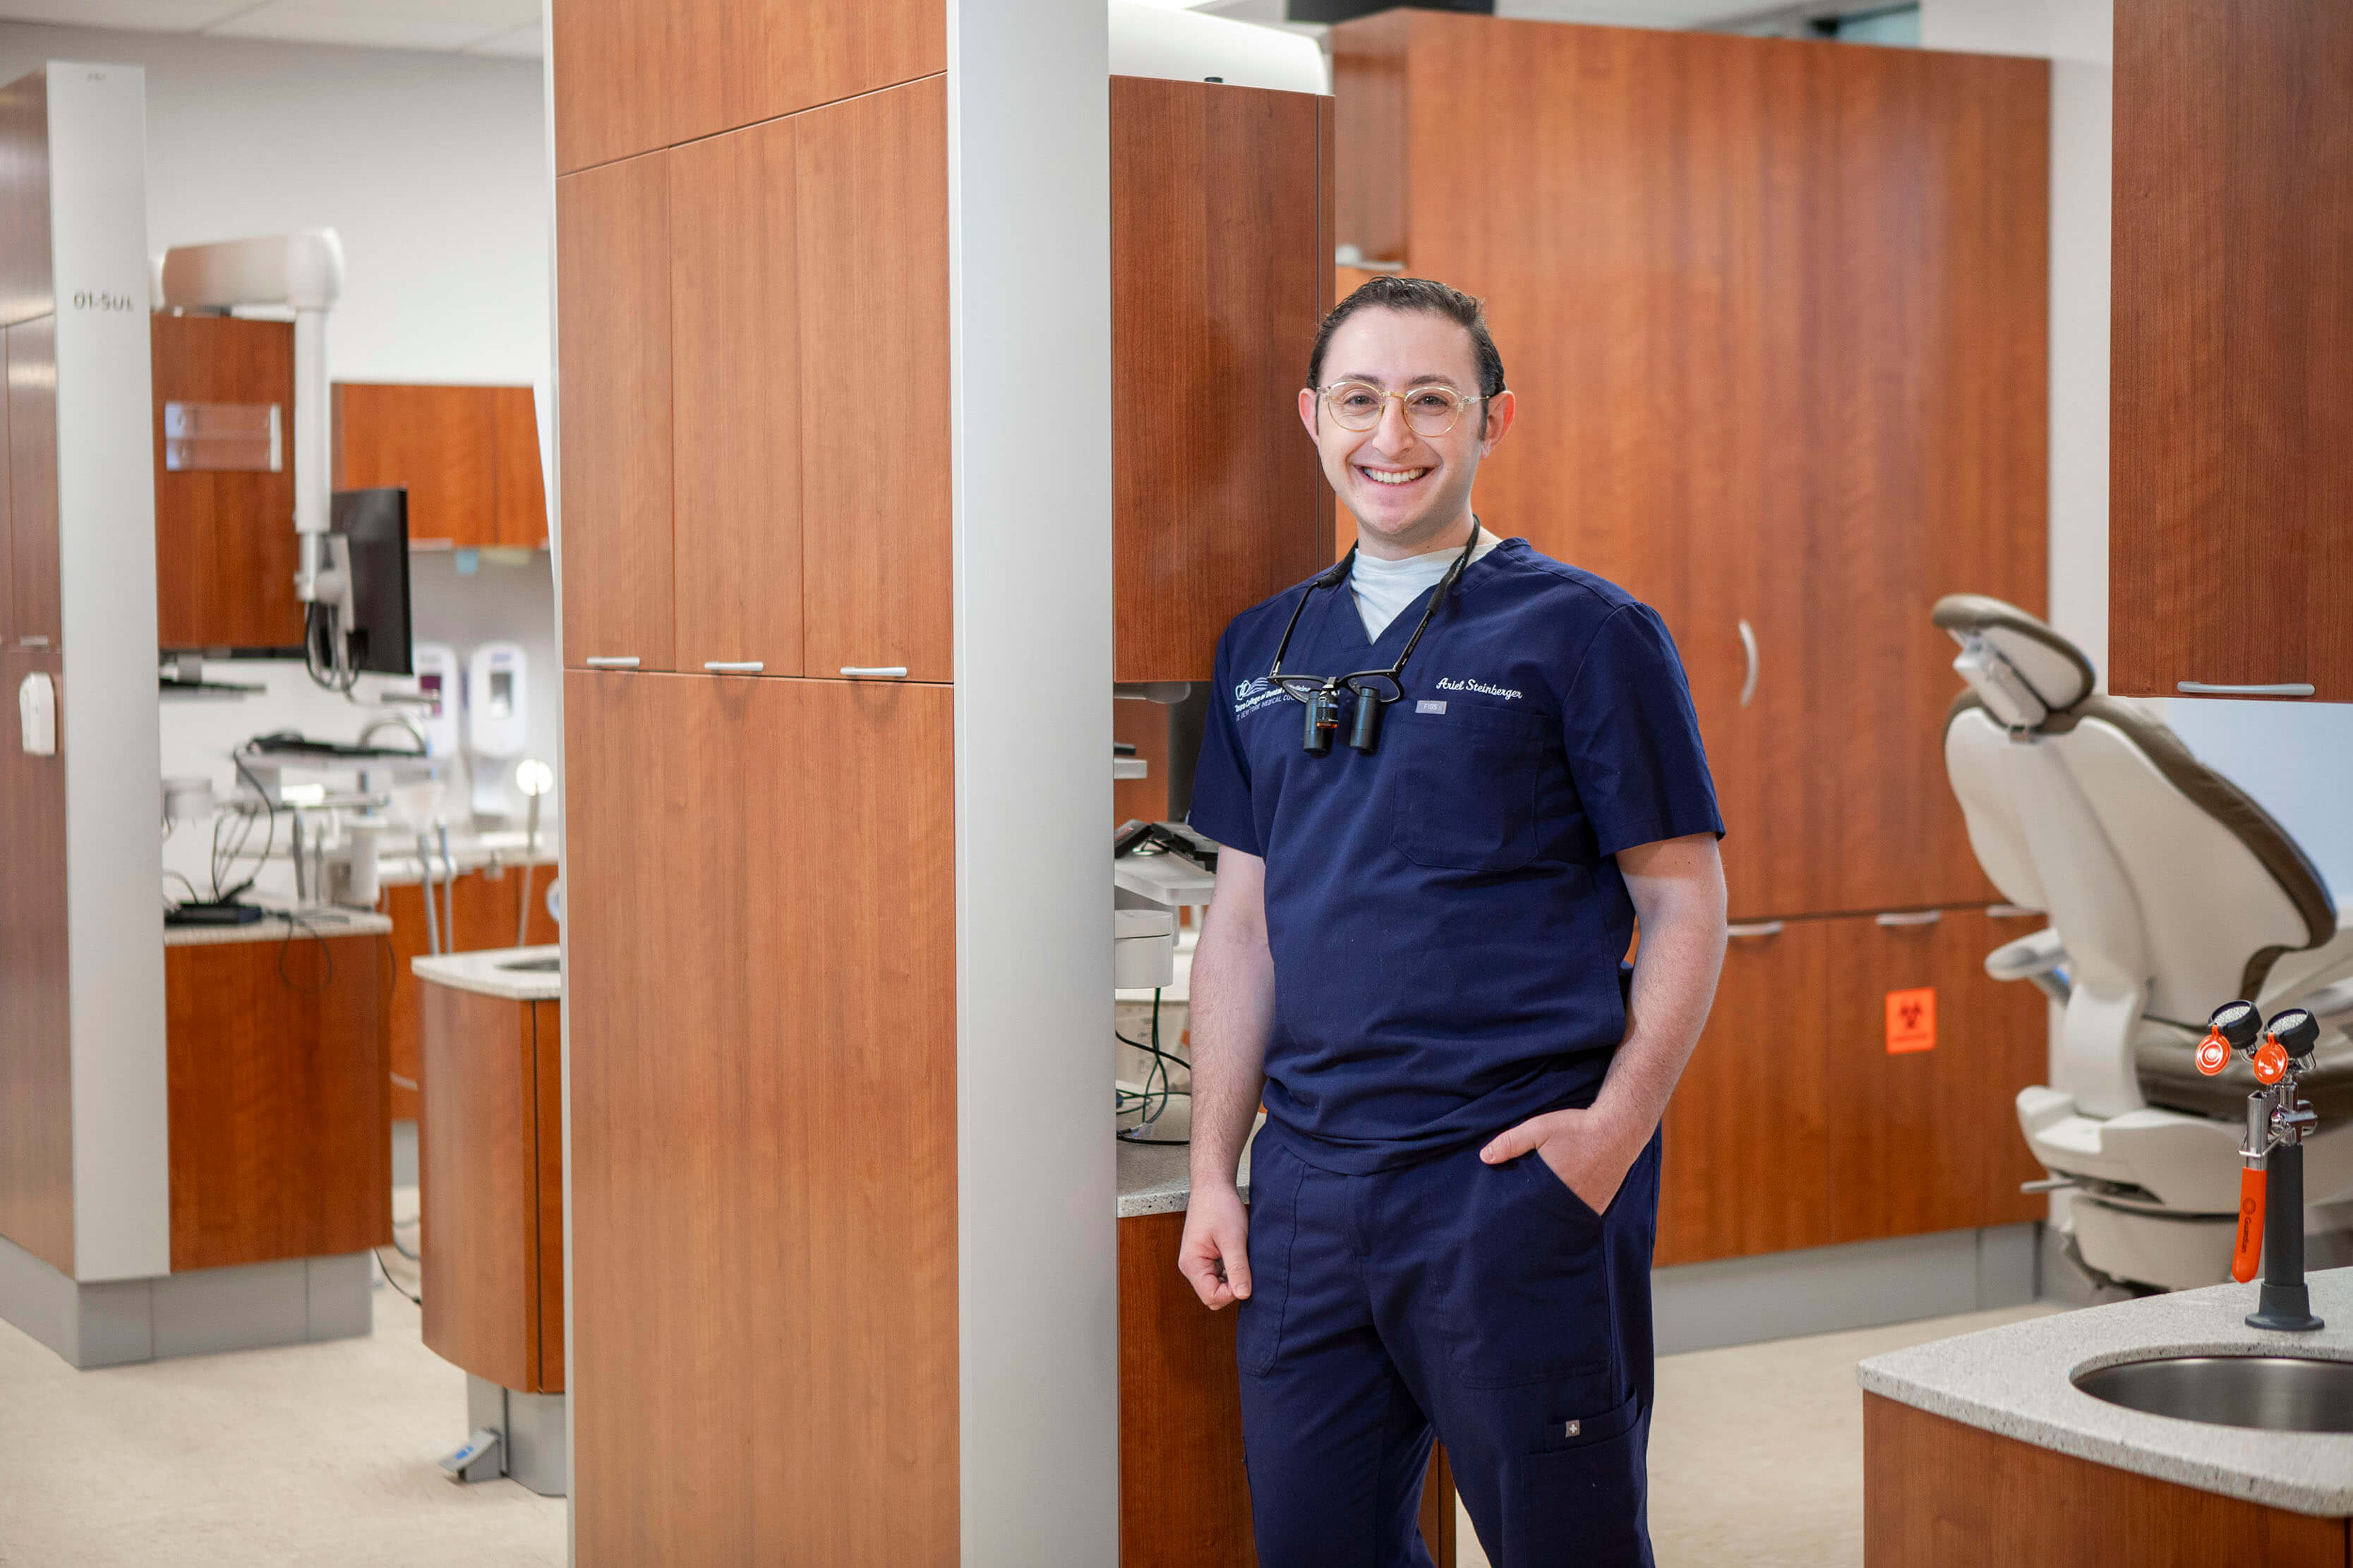 Ariel Steinberger, an alum of Lander College for Men and a fourth year student at Touro College of Dental Medicine.